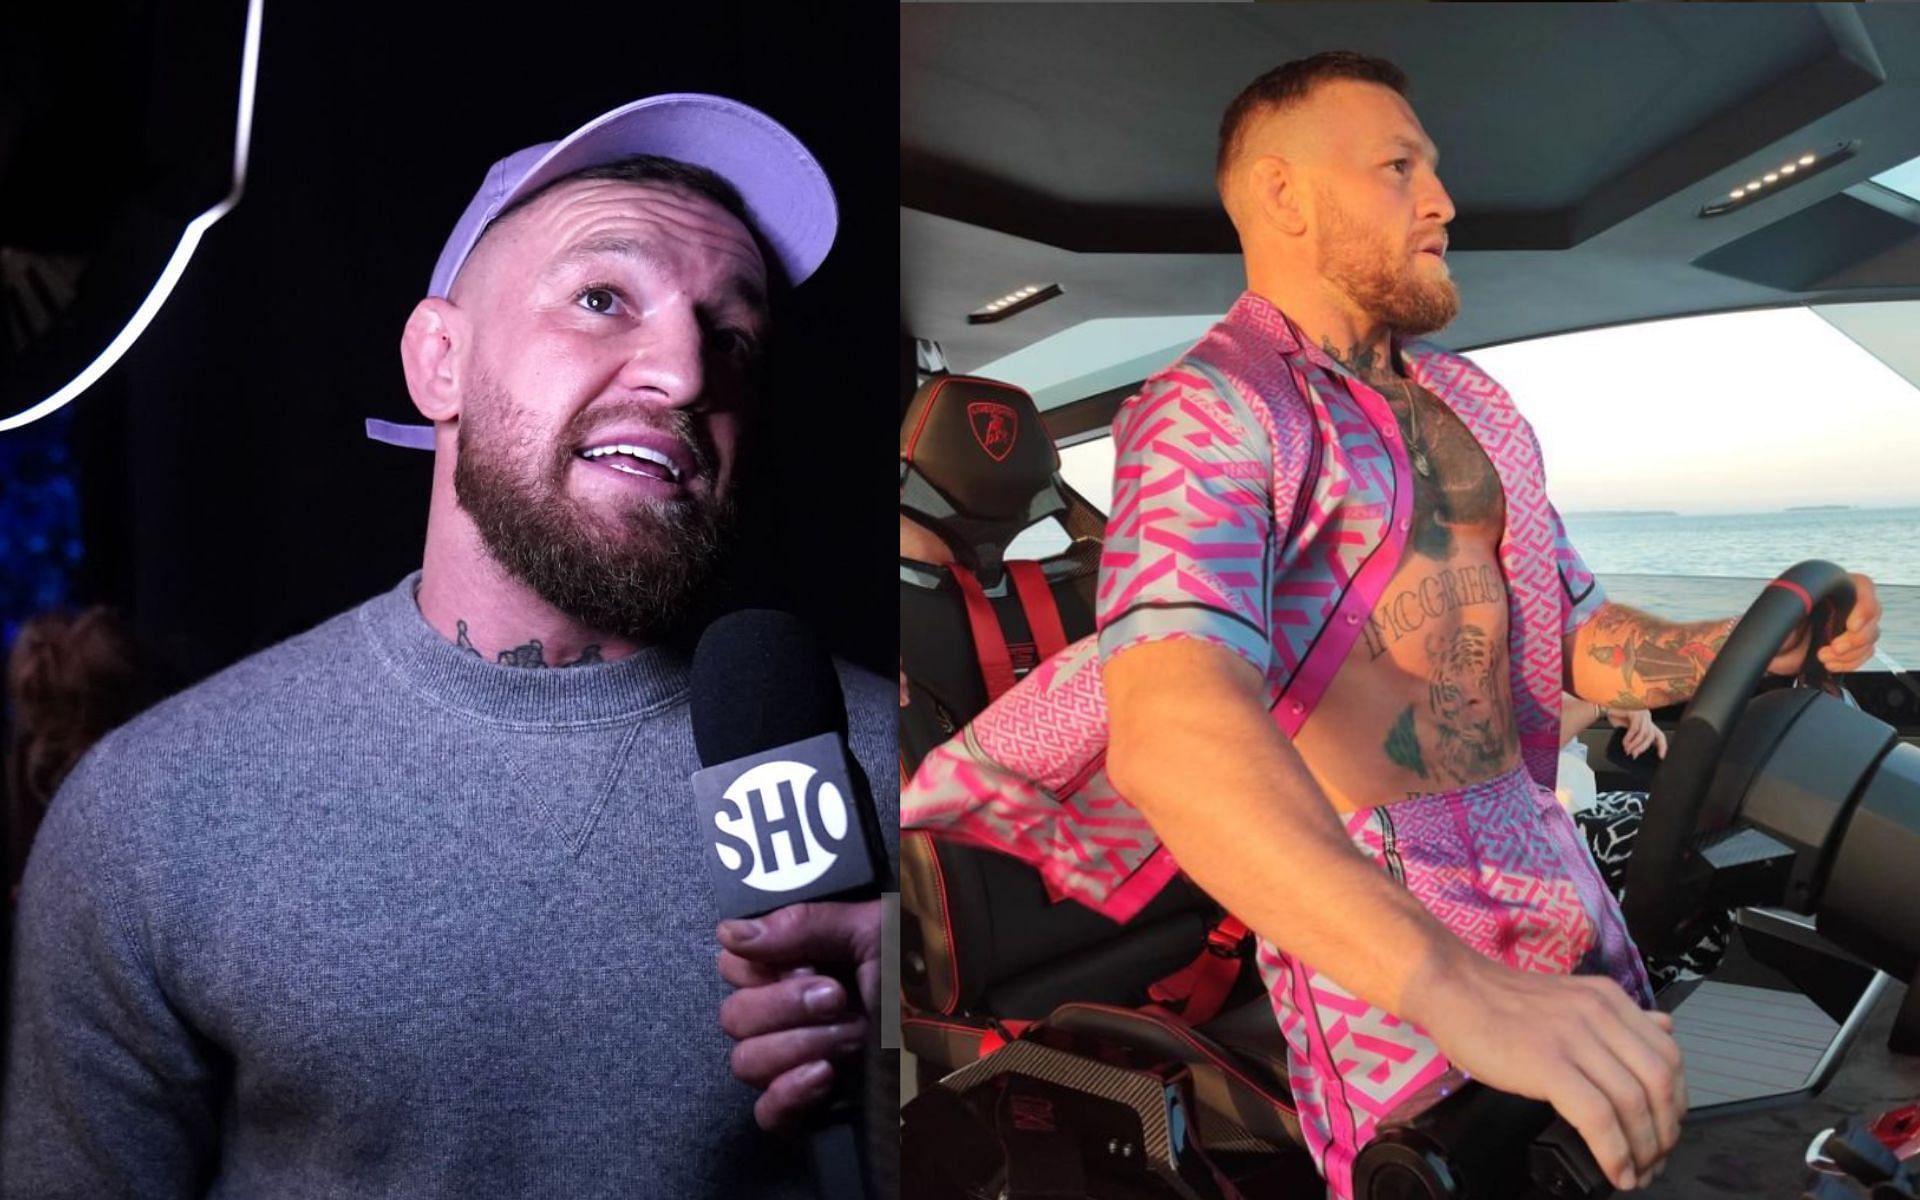 Conor McGregor at Bellator 275 (left) and McGregor on his Lamborghini yacht (right) [Image Courtesy: @thenotoriousmma on Instagram]